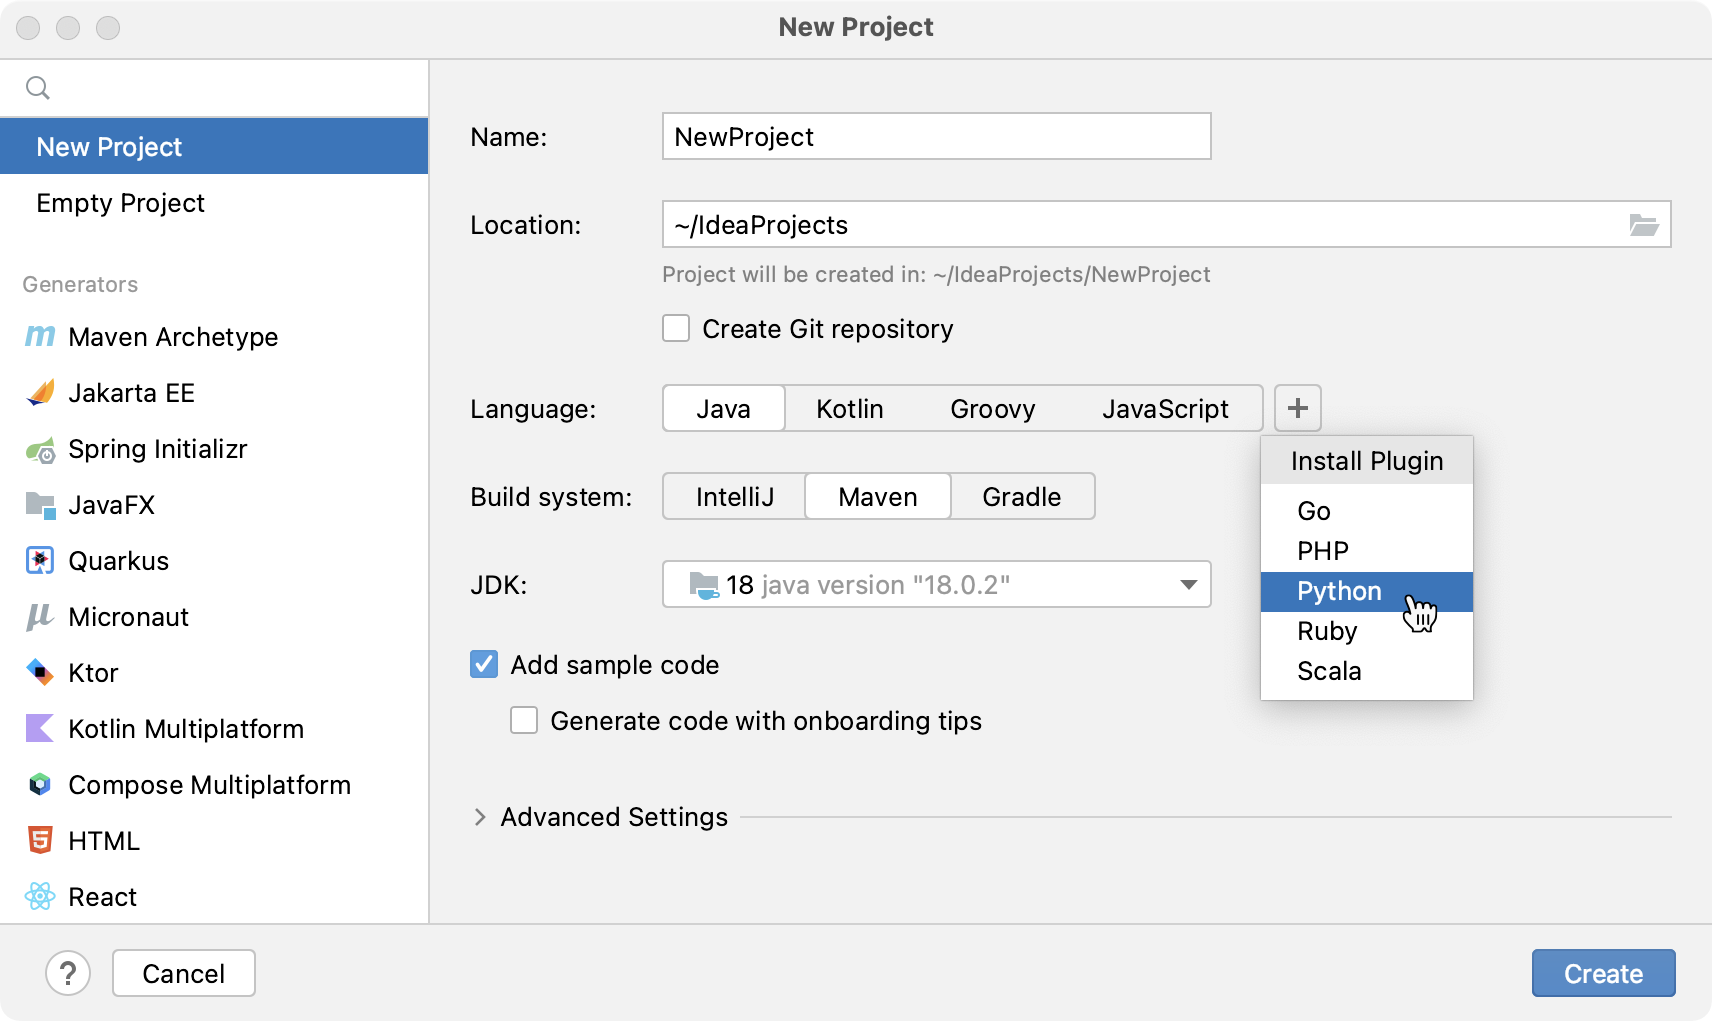 Create a new project or open an existing project in the IDE.
Add or modify the necessary resources within the IDE's resource editor.